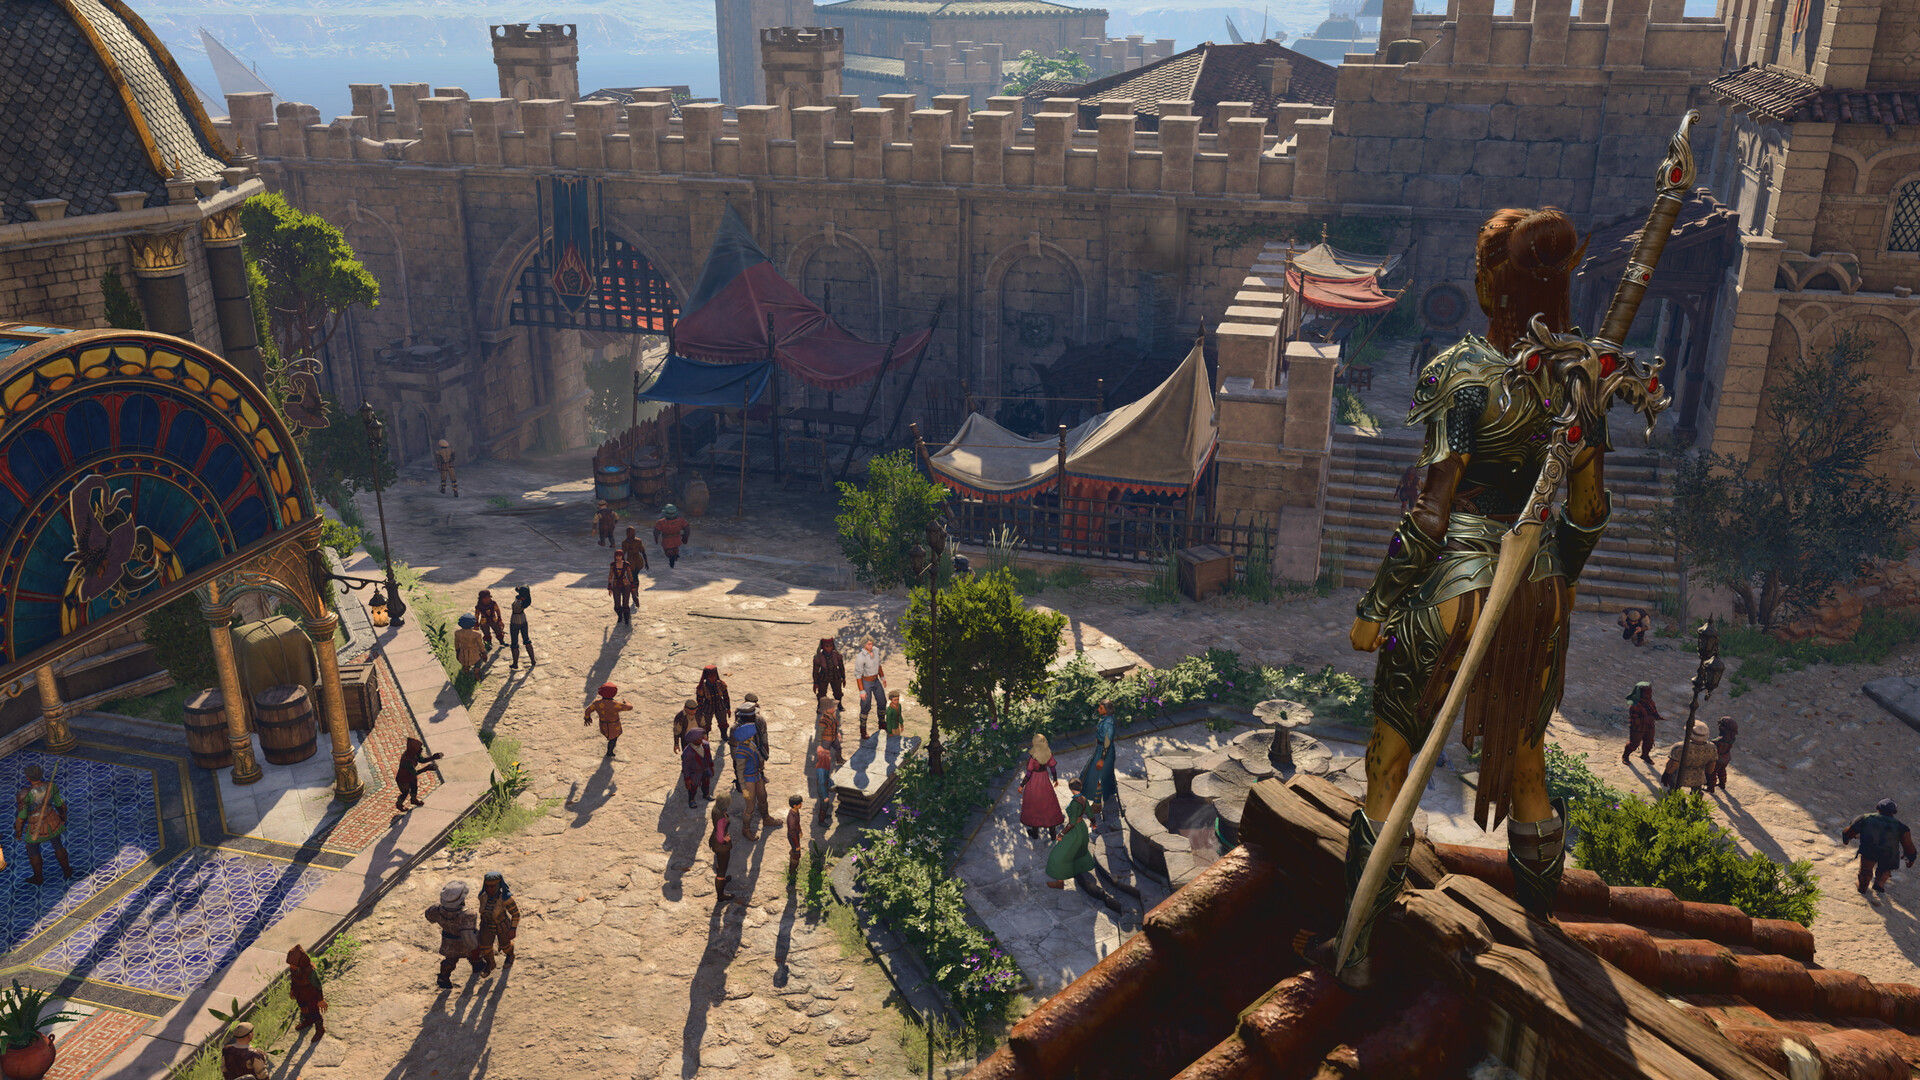 A warrior in armor with a large sword on their back standing on a roof top looking out across a castle courtyard filled with people in the game Baldur's Gate 3.